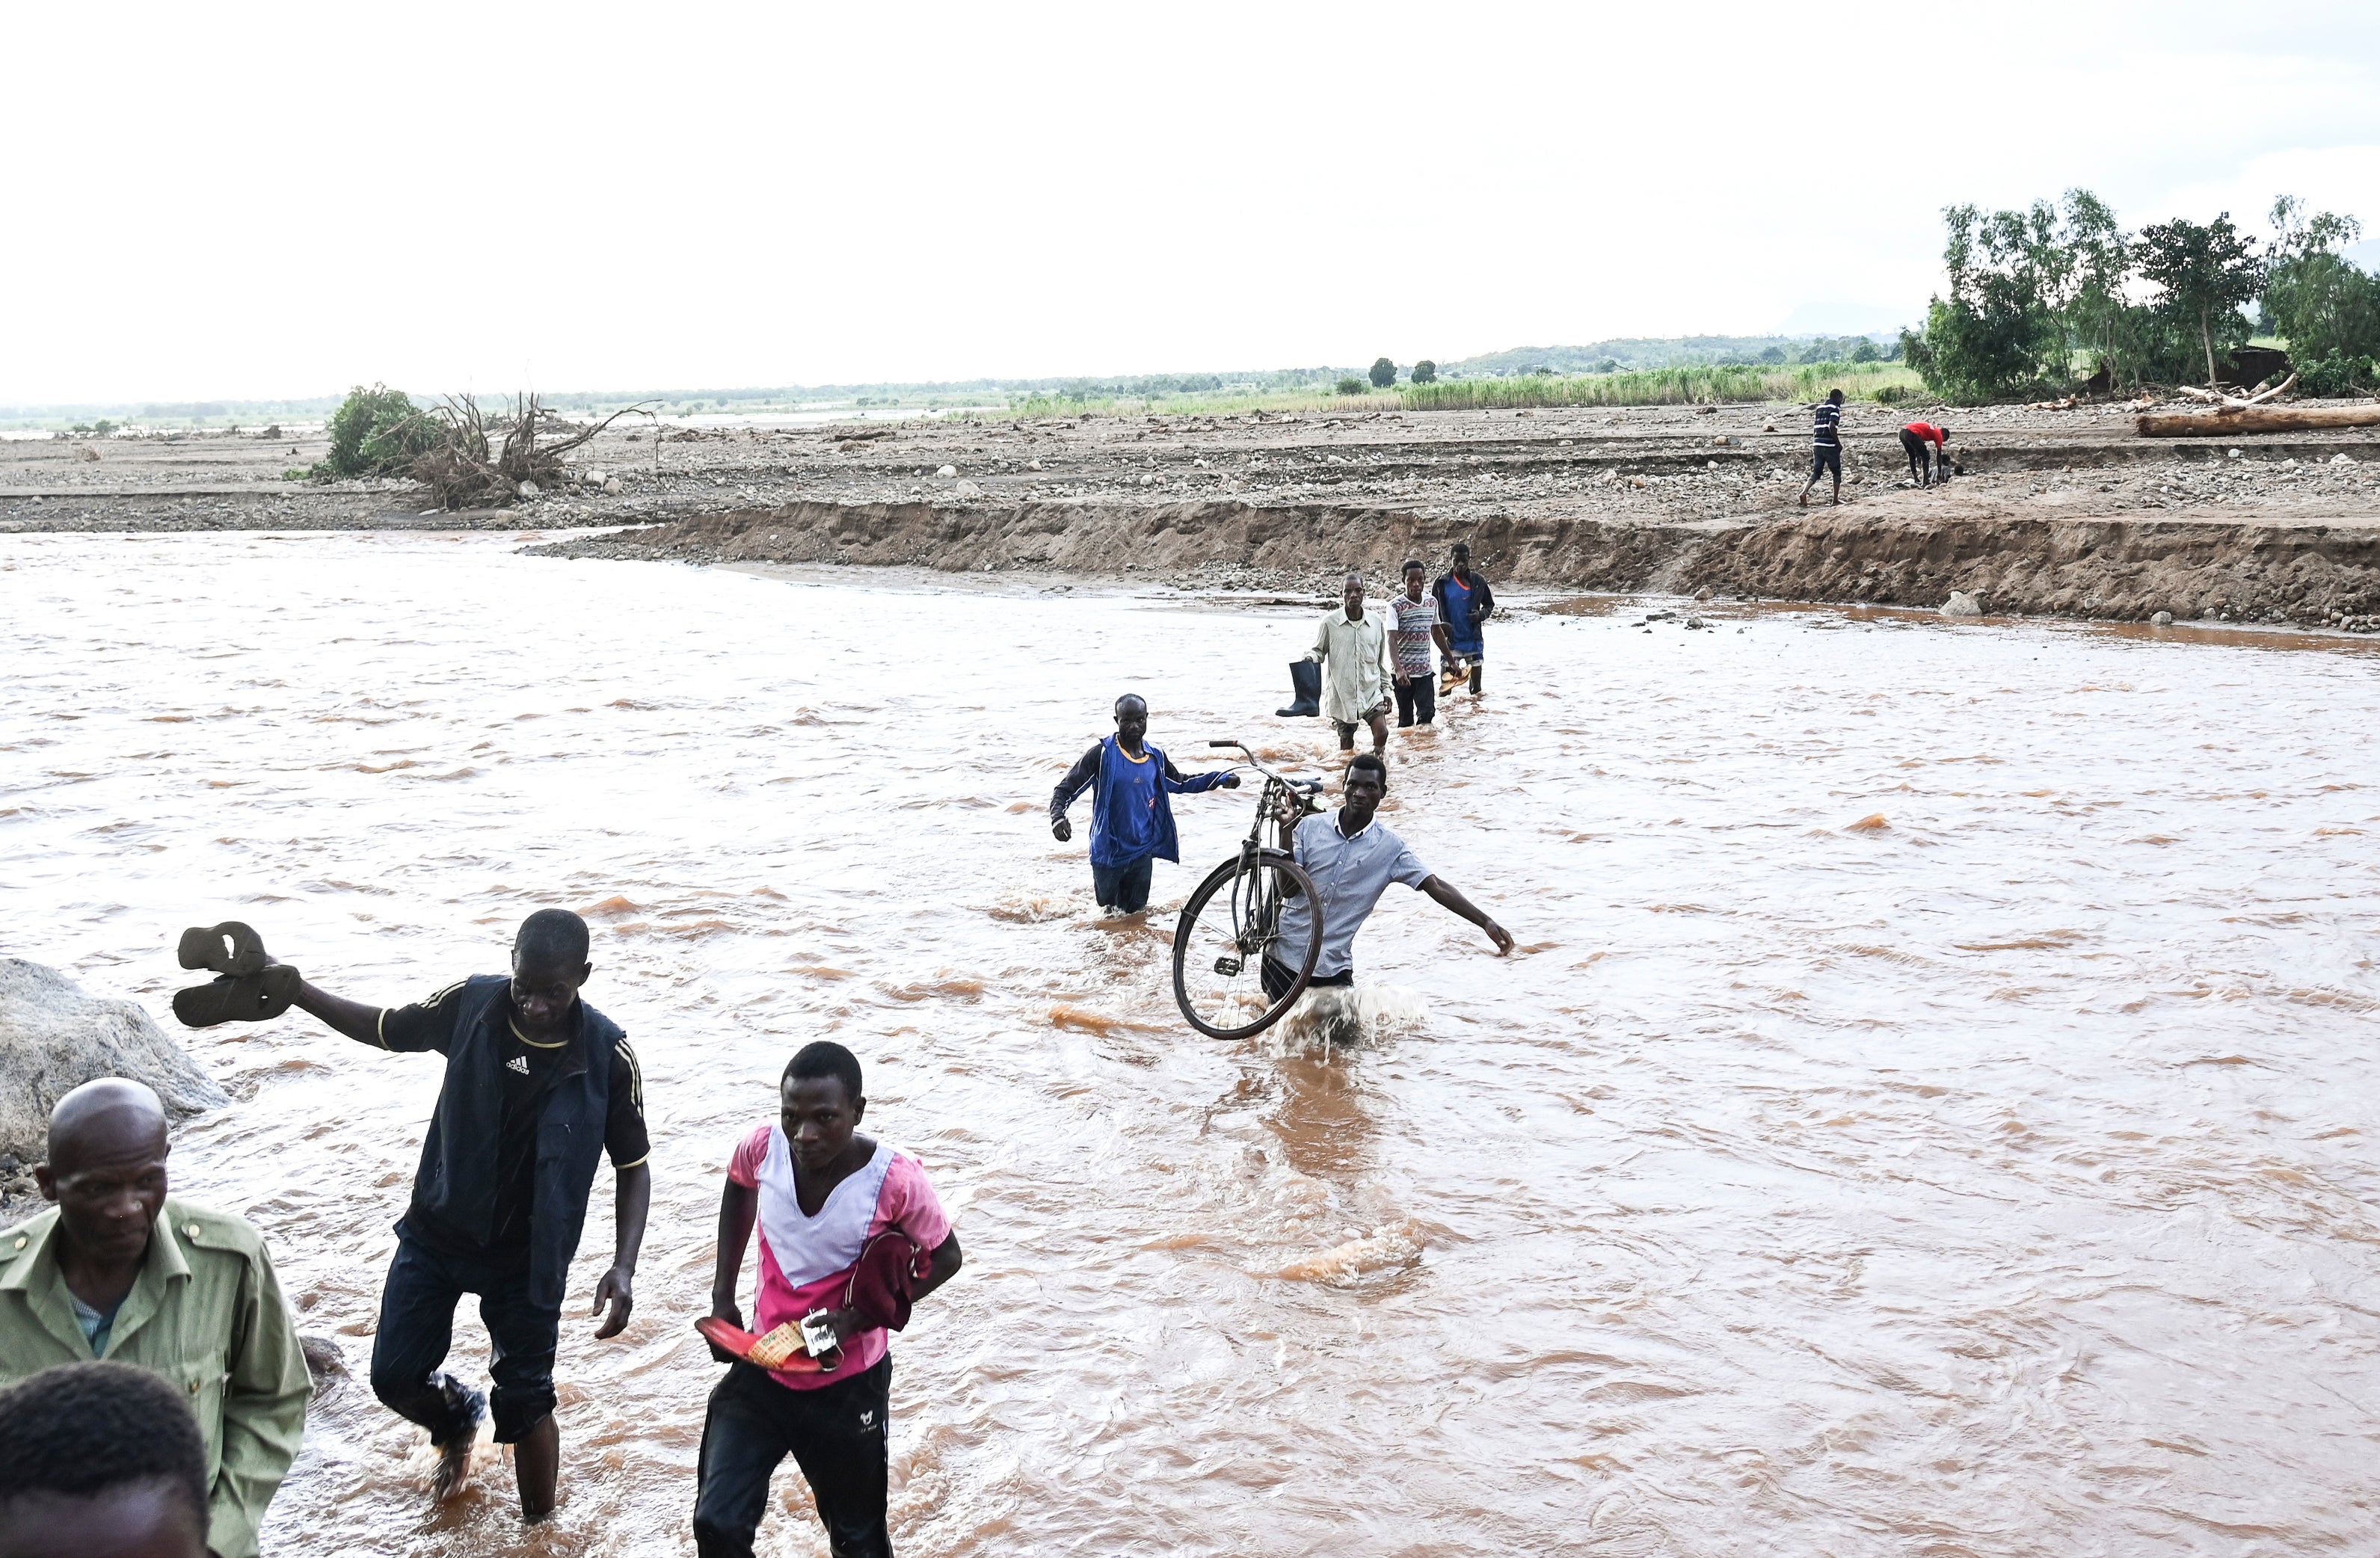 People wade through flood waters caused by last week's heavy rains caused by Tropical Cyclone Freddy in Phalombe, southern Malawi